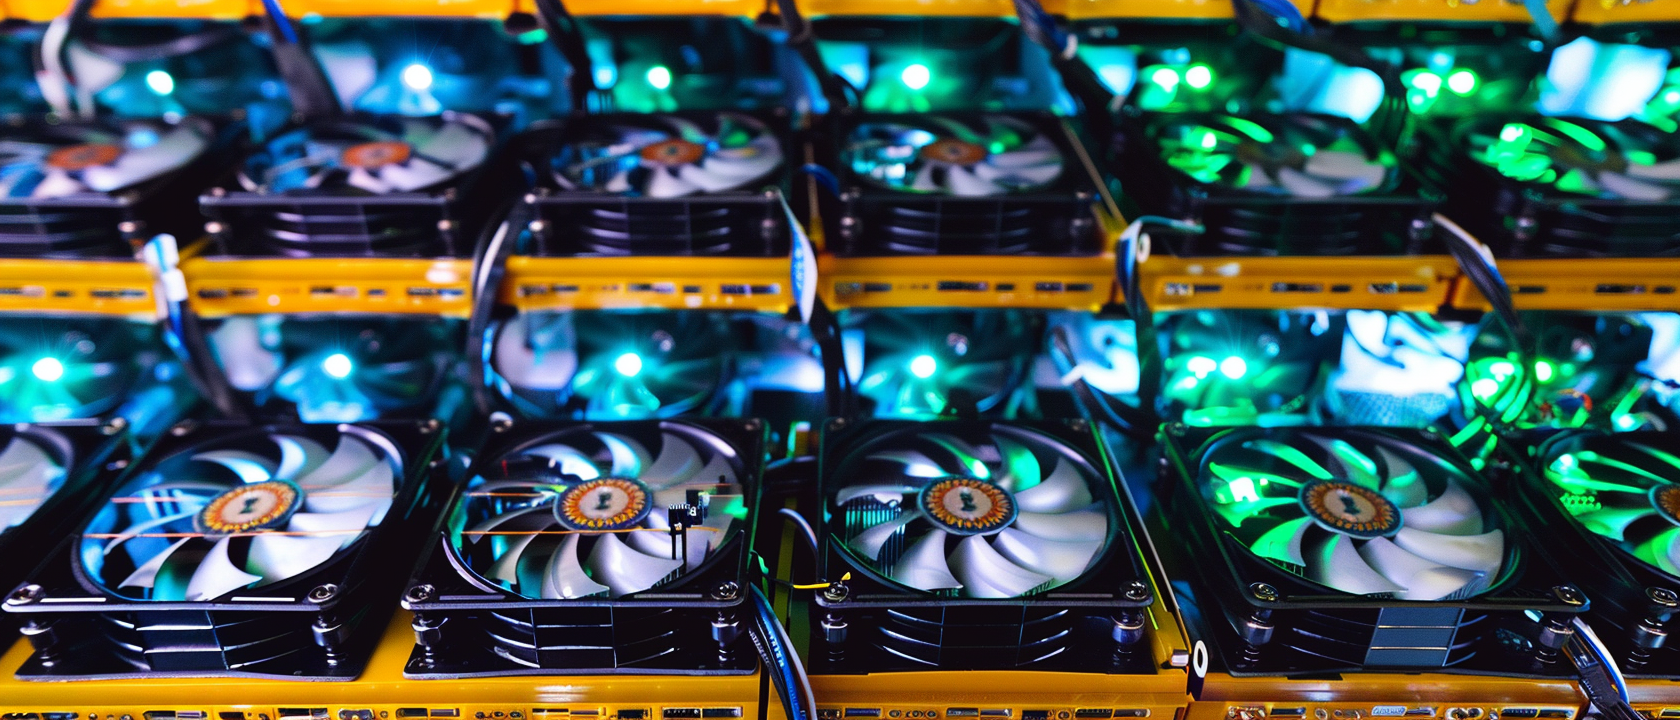 Marathon Digital Aims for 50 EH/s Hashrate by Year's End